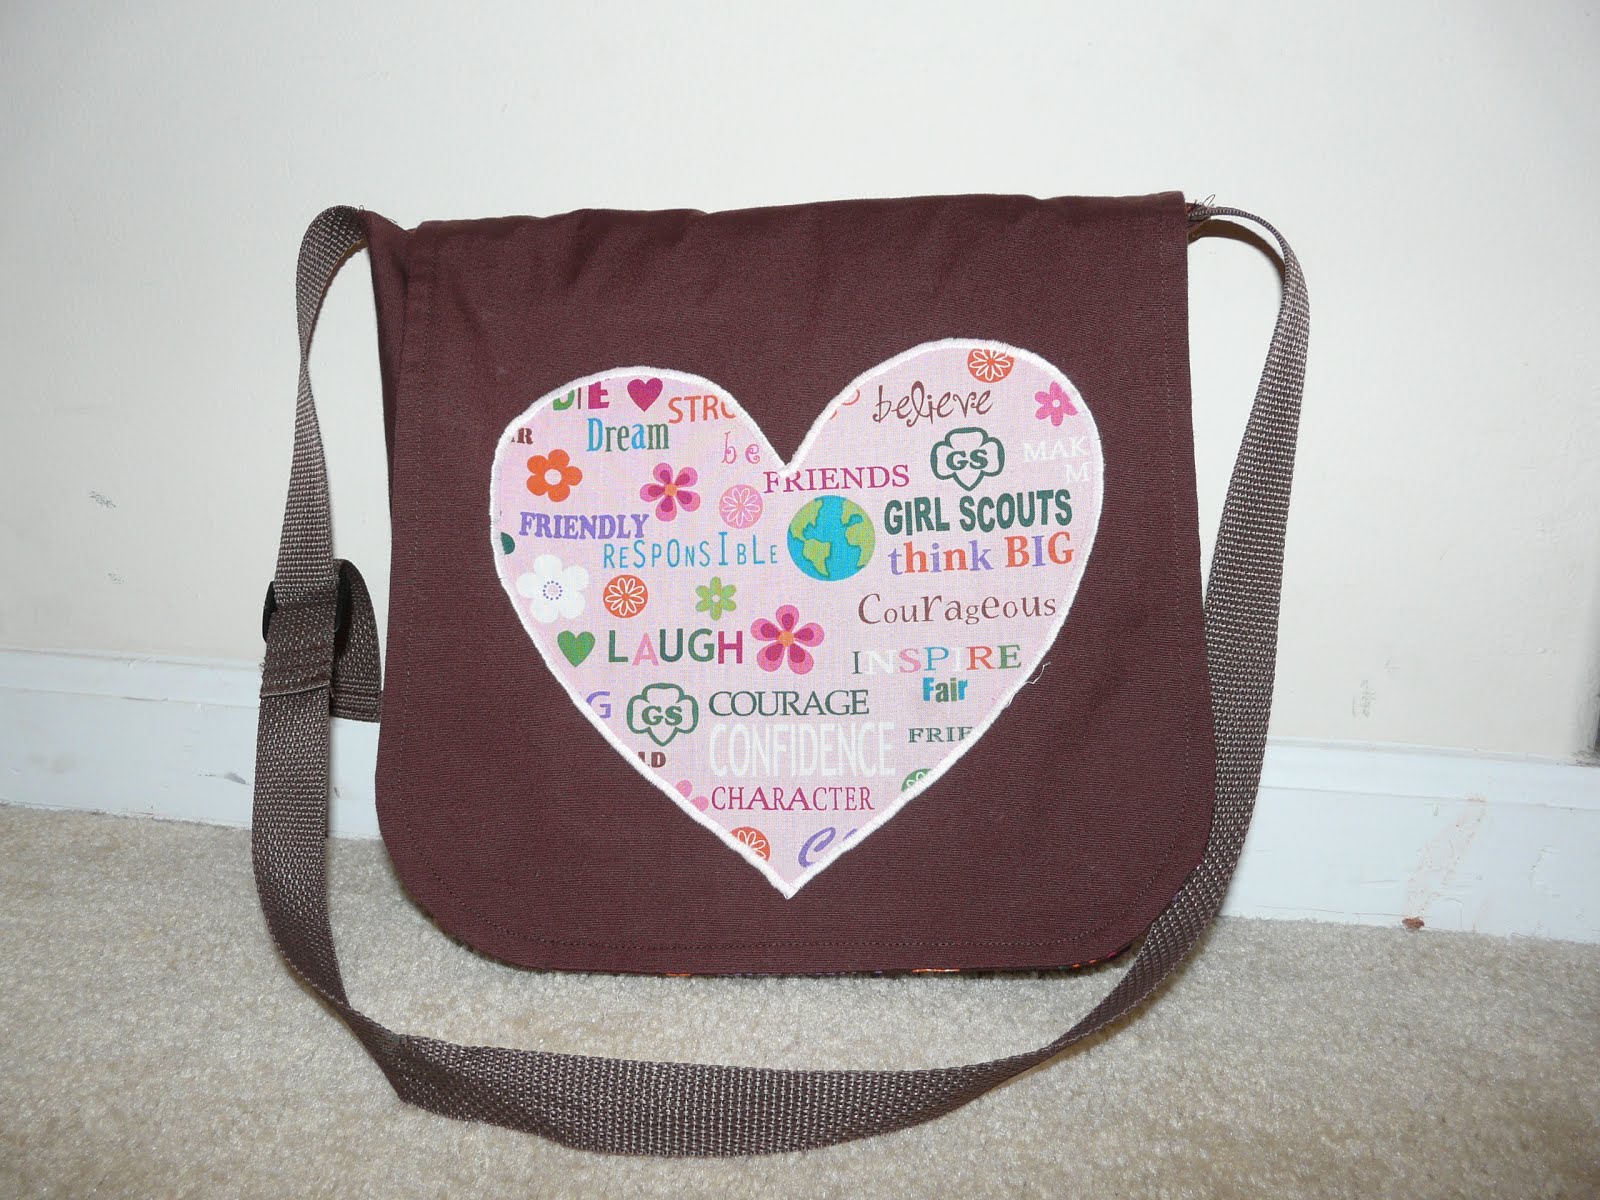 Made with Love and Ladybug Hugs: Girl Scout Tote Bags